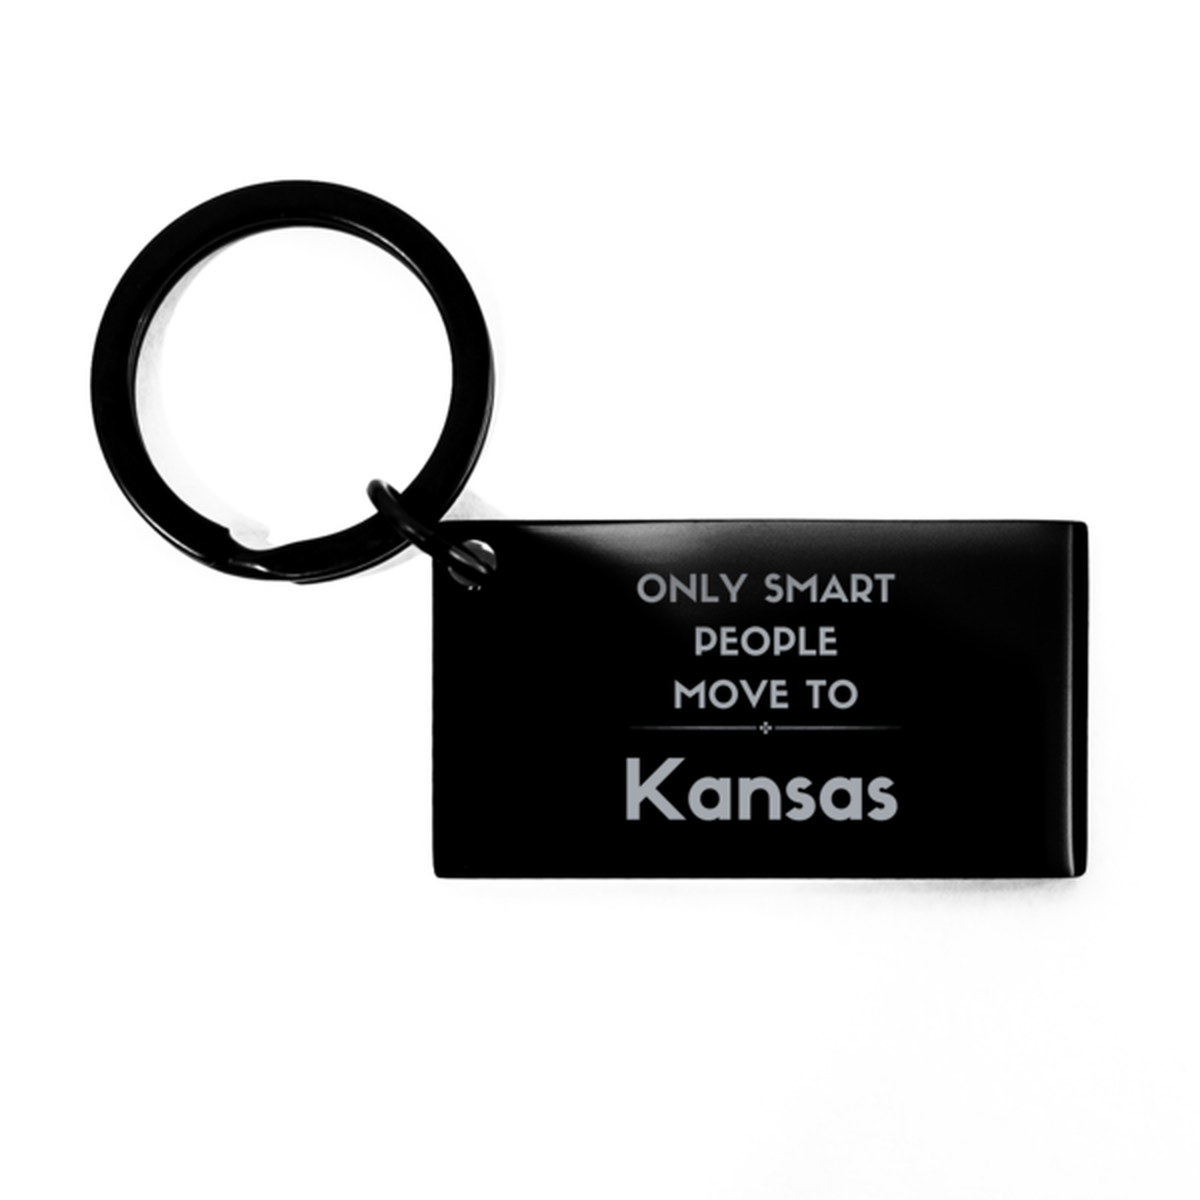 Only smart people move to Kansas Keychain, Gag Gifts For Kansas, Move to Kansas Gifts for Friends Coworker Funny Saying Quote